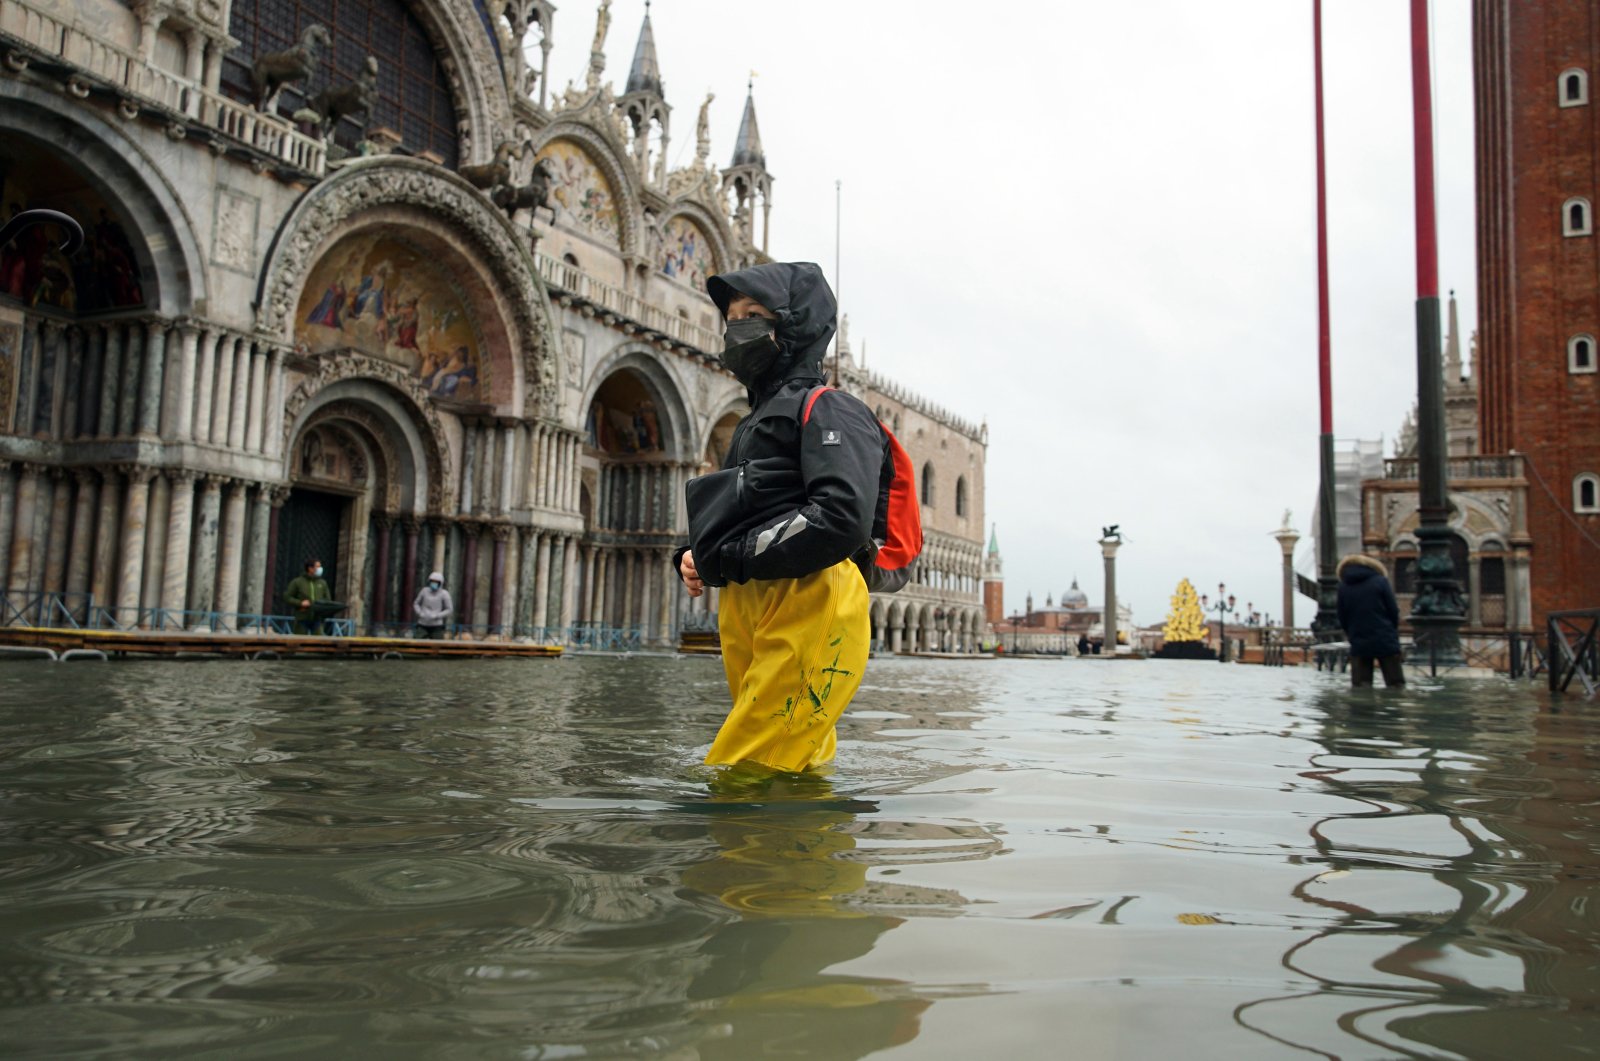 People wade their way through the water in flooded St. Mark's Square following a high tide, in Venice, Italy, Dec. 8, 2020. (AP Photo)